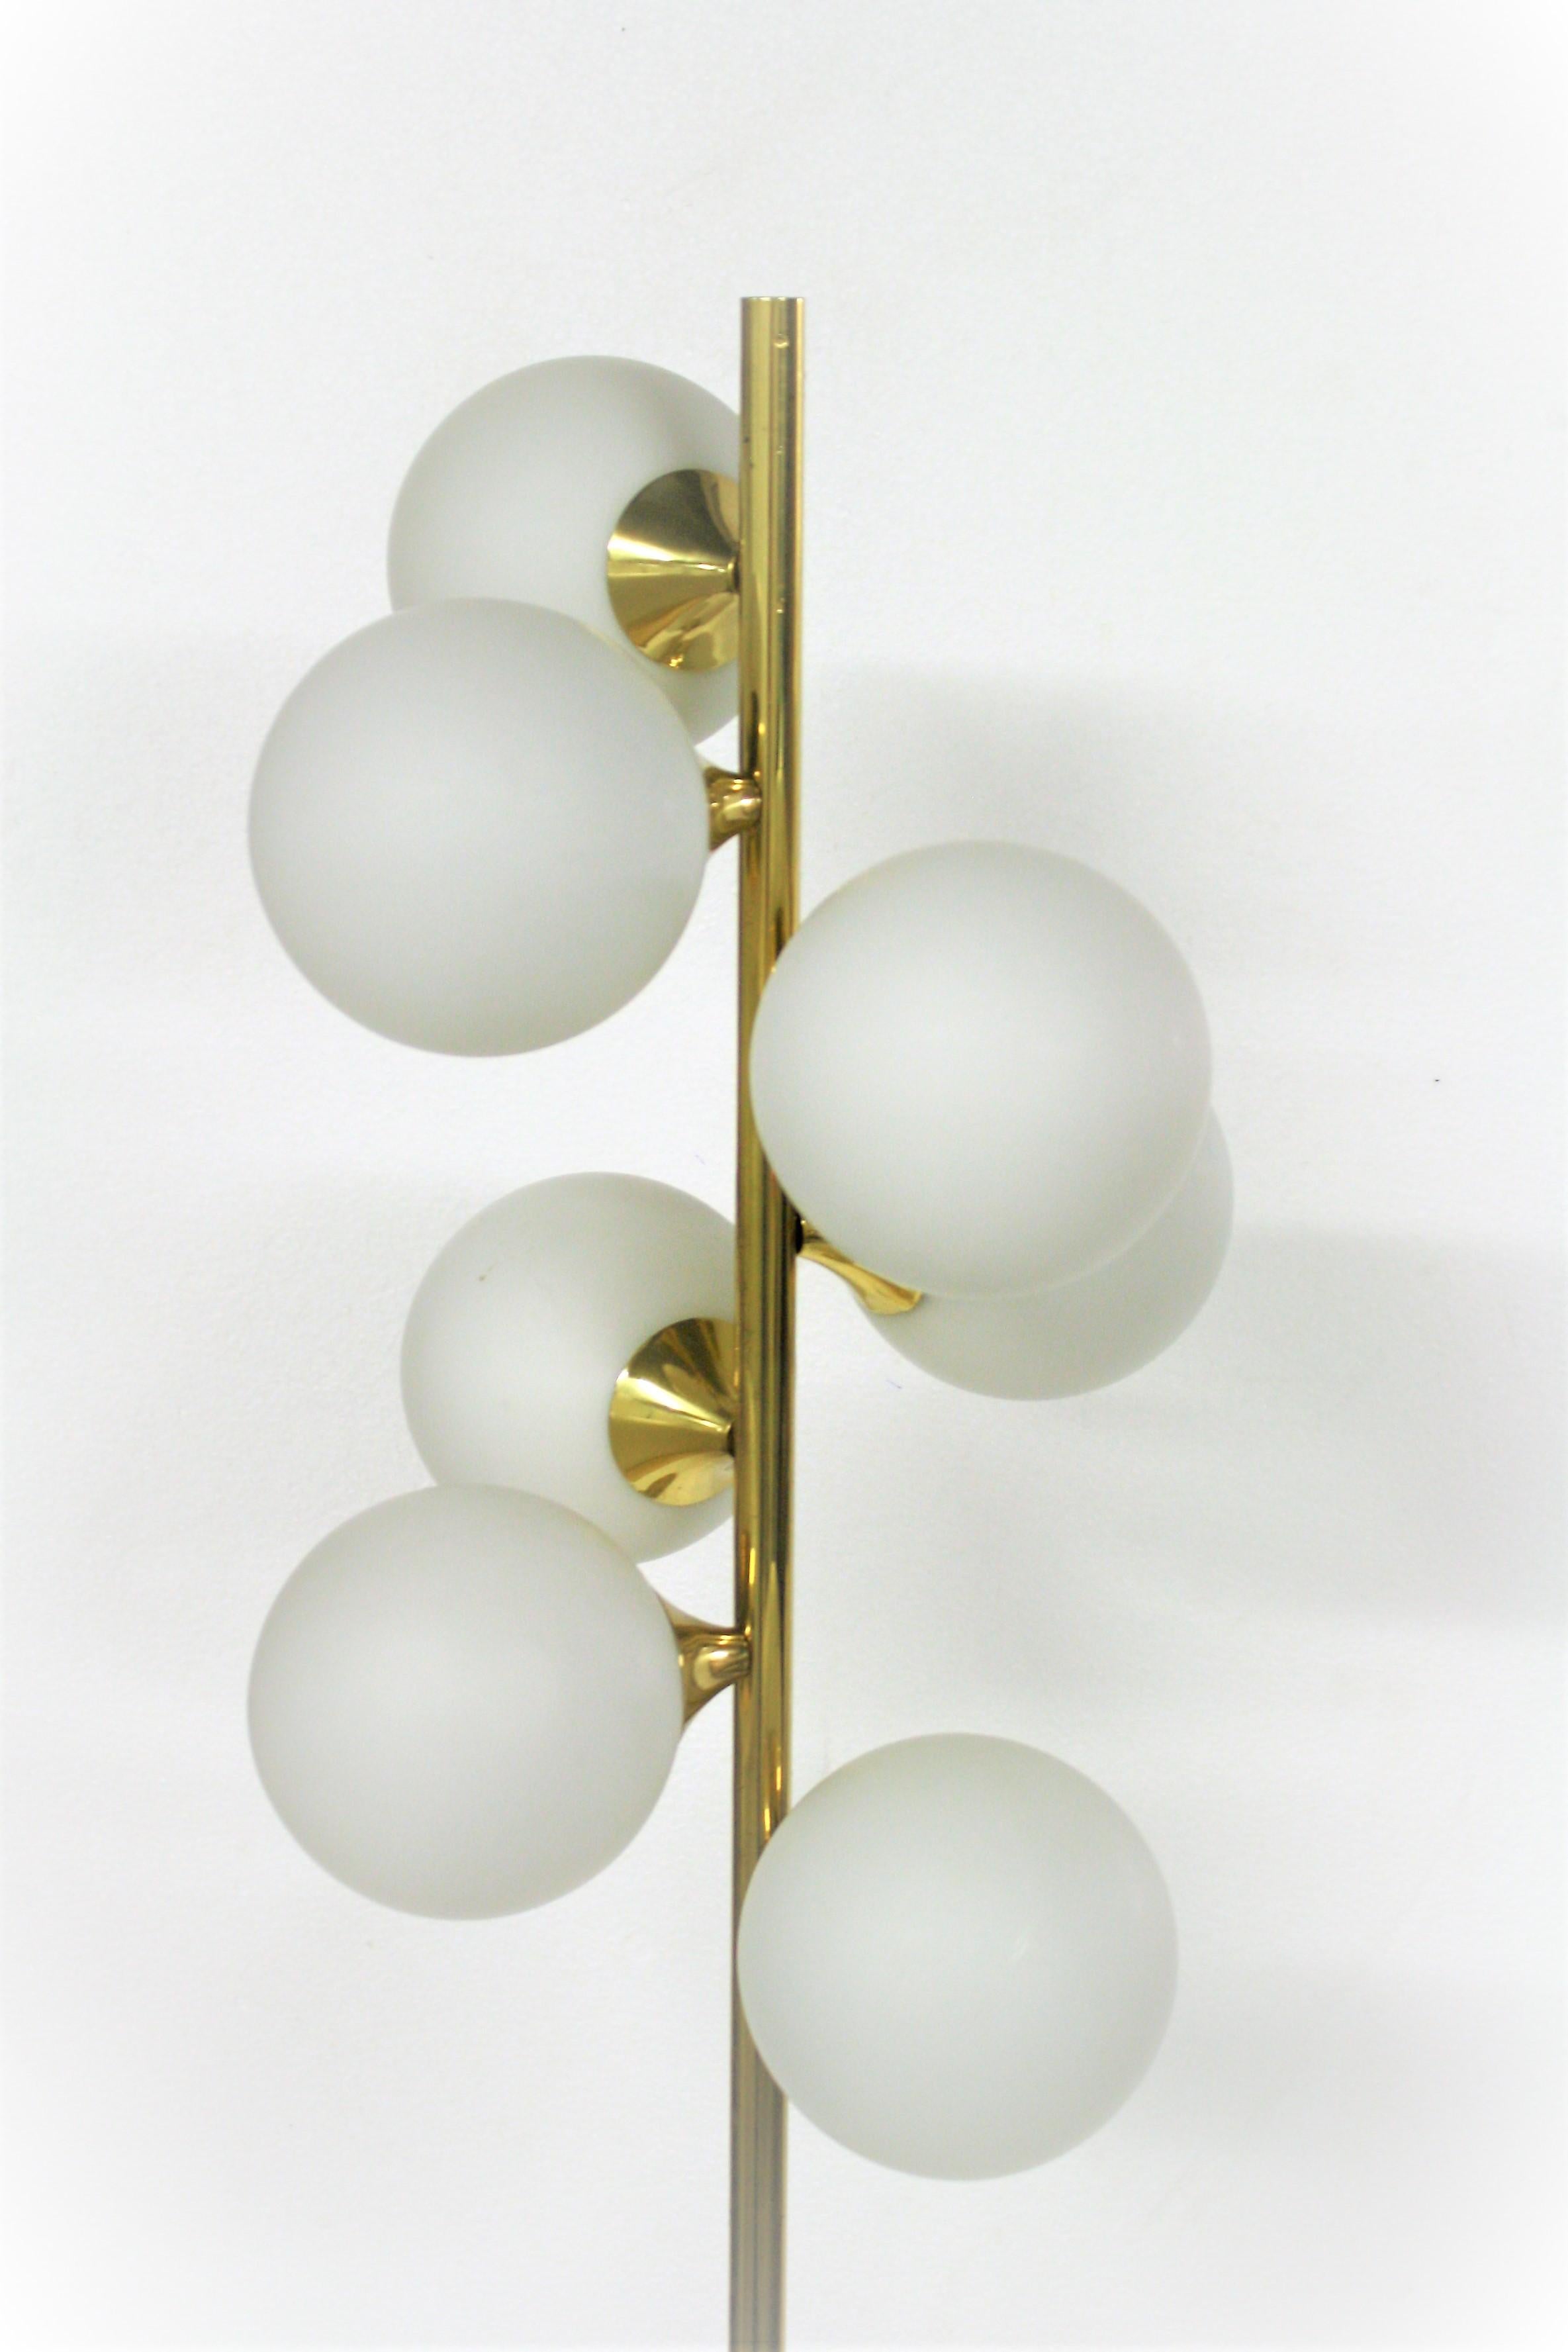 Mid-Century Modern spiral brass floor lamp with seven white glass globe shades.

This sixties lamp emits a warm light, creates a lovely atmosphere and has a timeless design.

The floor lamp is very much in the style of Stilnovo floor lamps but